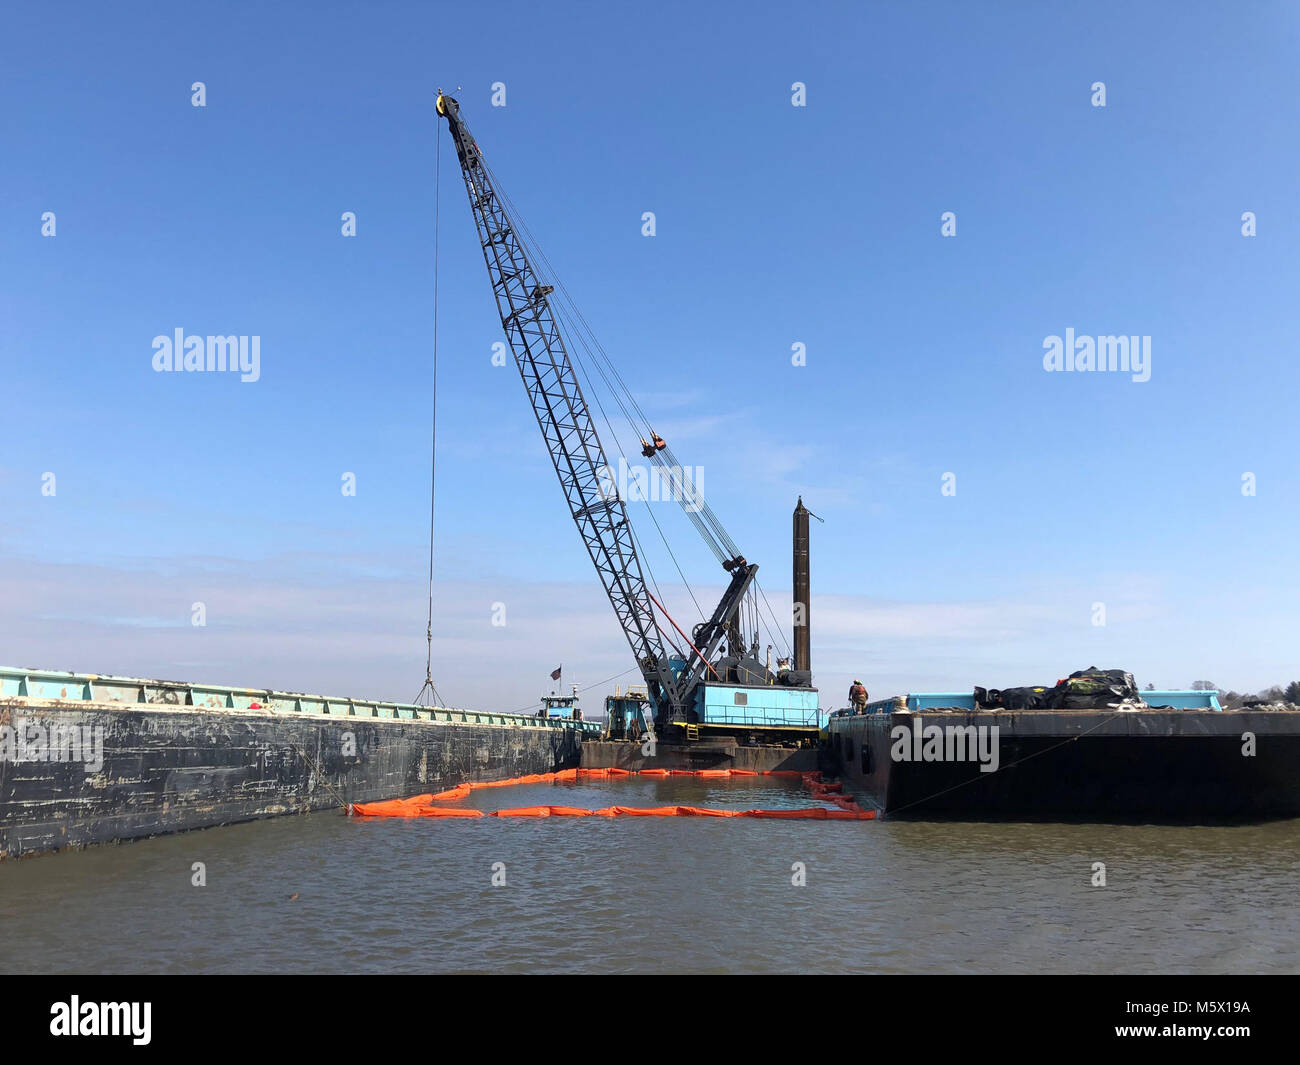 A dredge excavates material from the North Cove Federal Navigation project in Old Saybrook, Connecticut.    Photo by Craig Martin/U.S. Army Corps of Engineers, New England District. Stock Photo